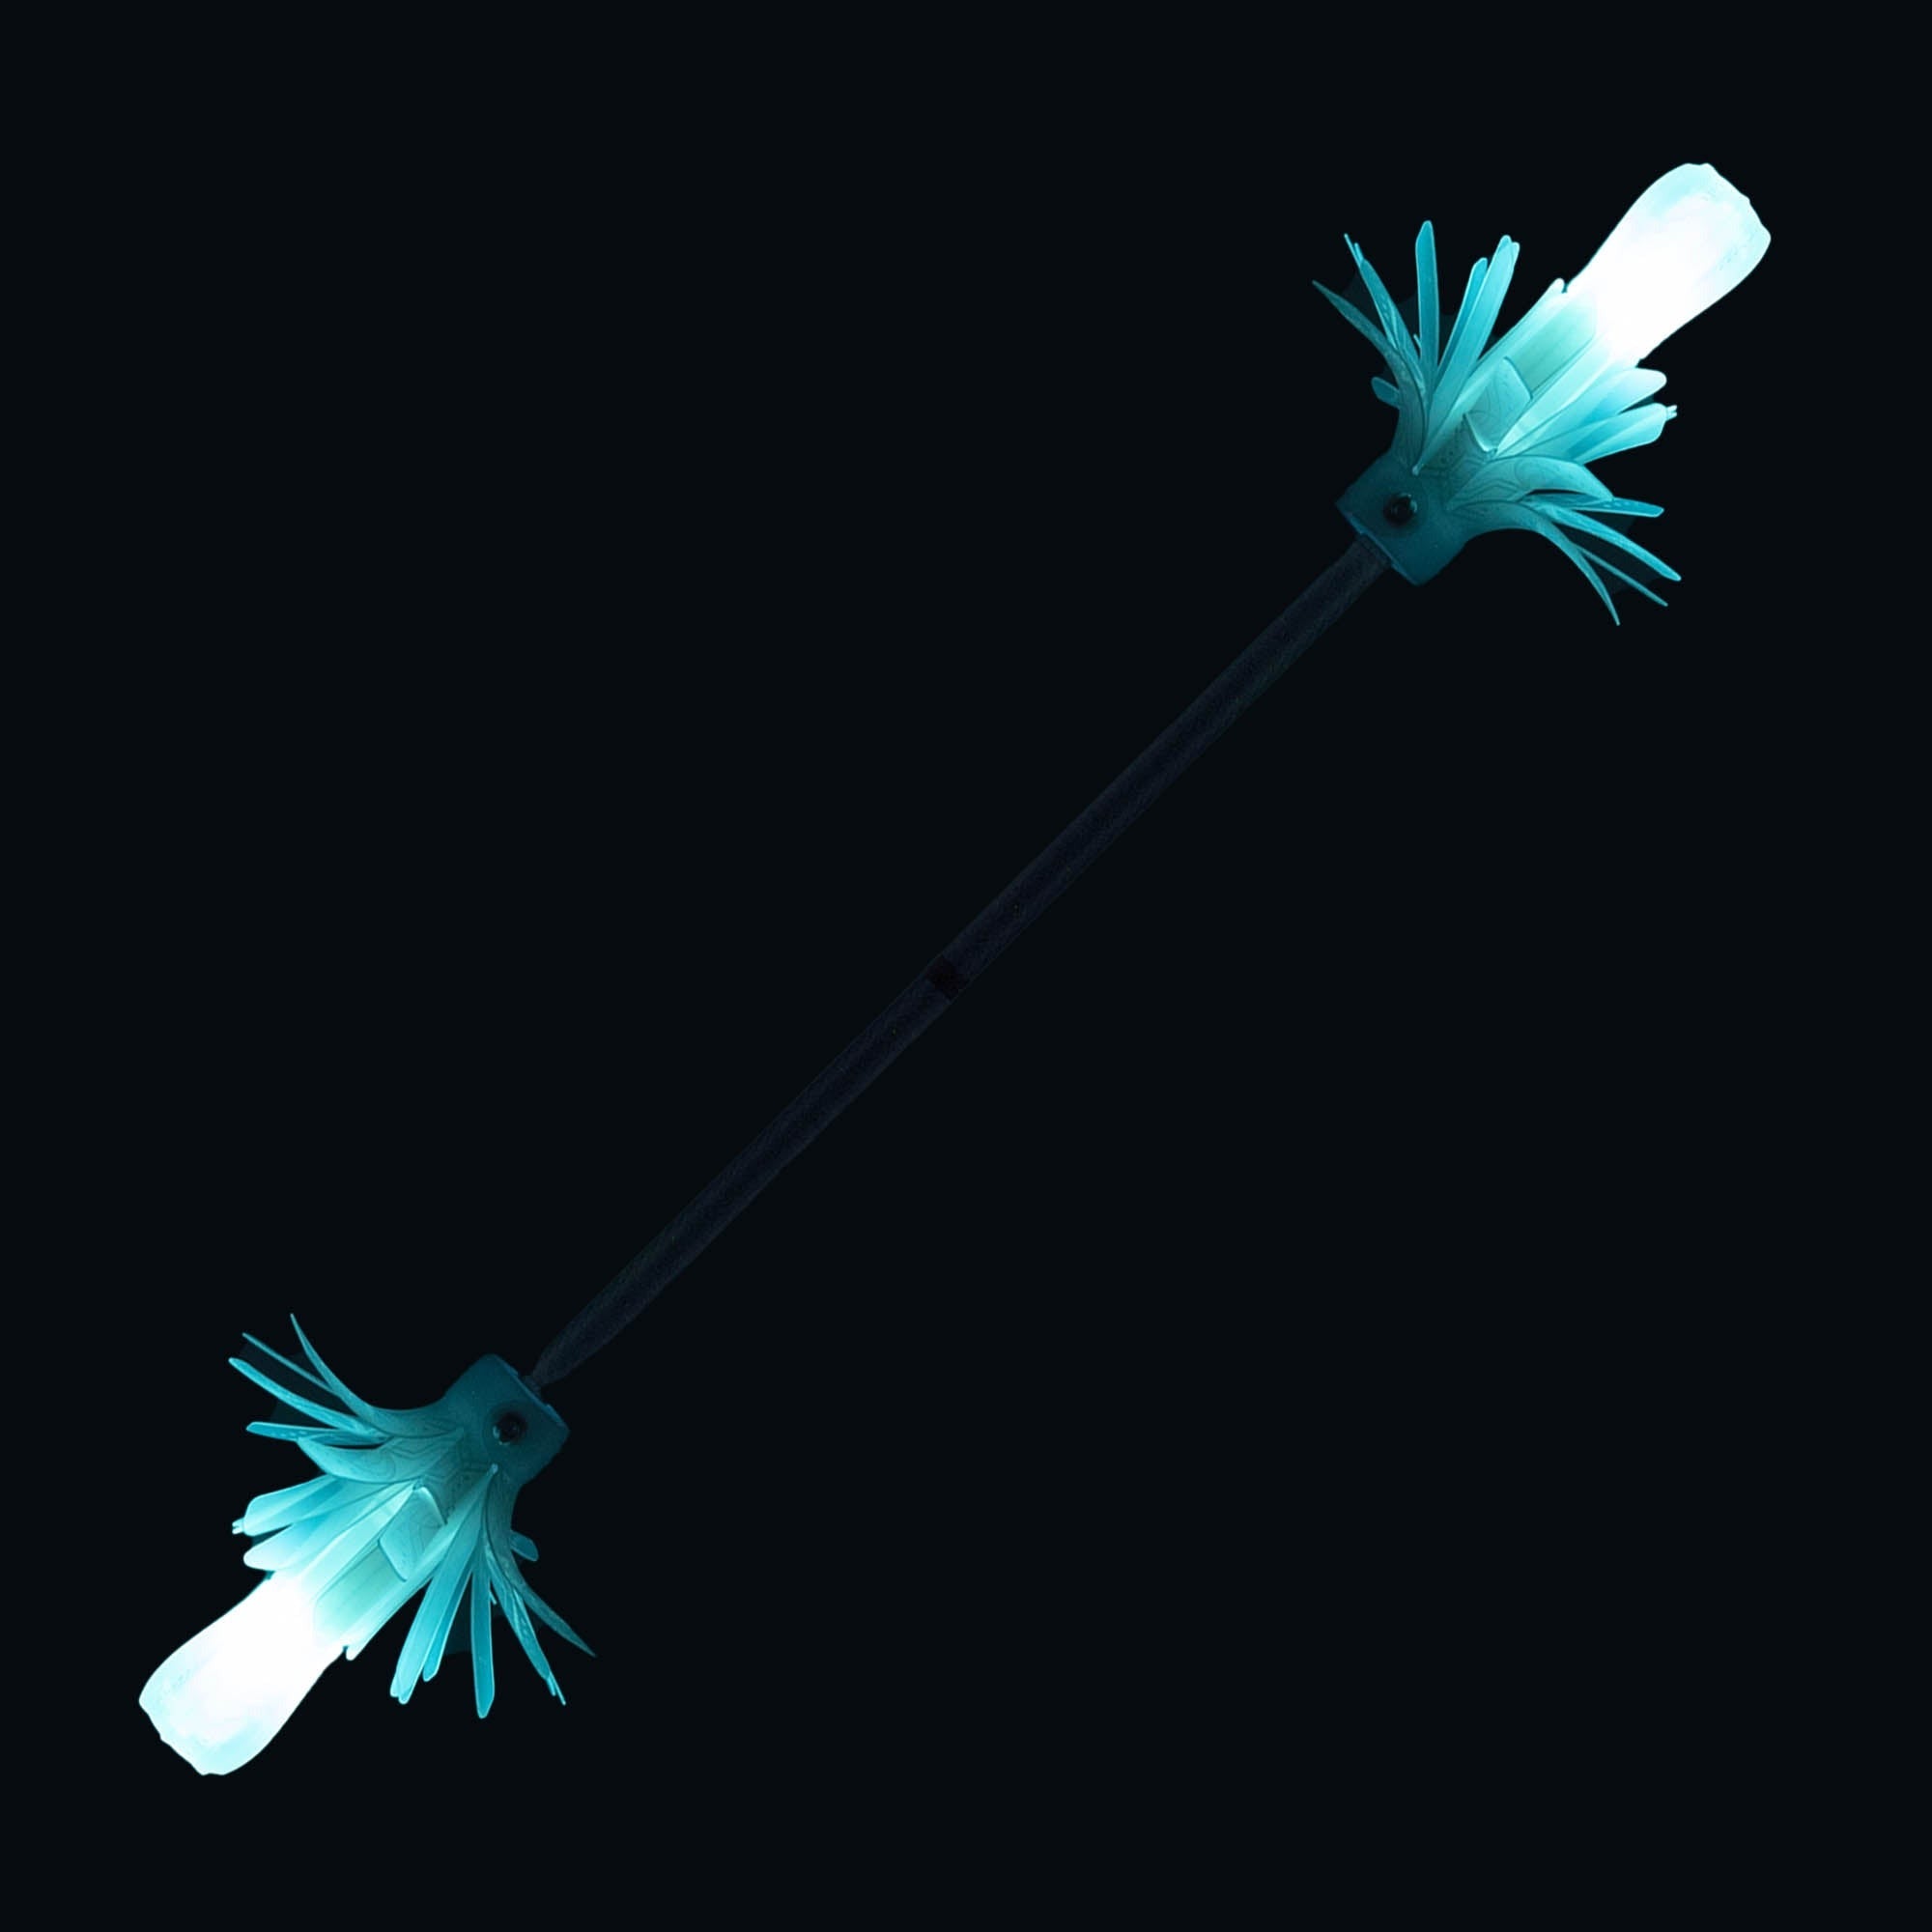 Flowtoys Composite LED Glow Flower Stick V2 glowing with a drak background